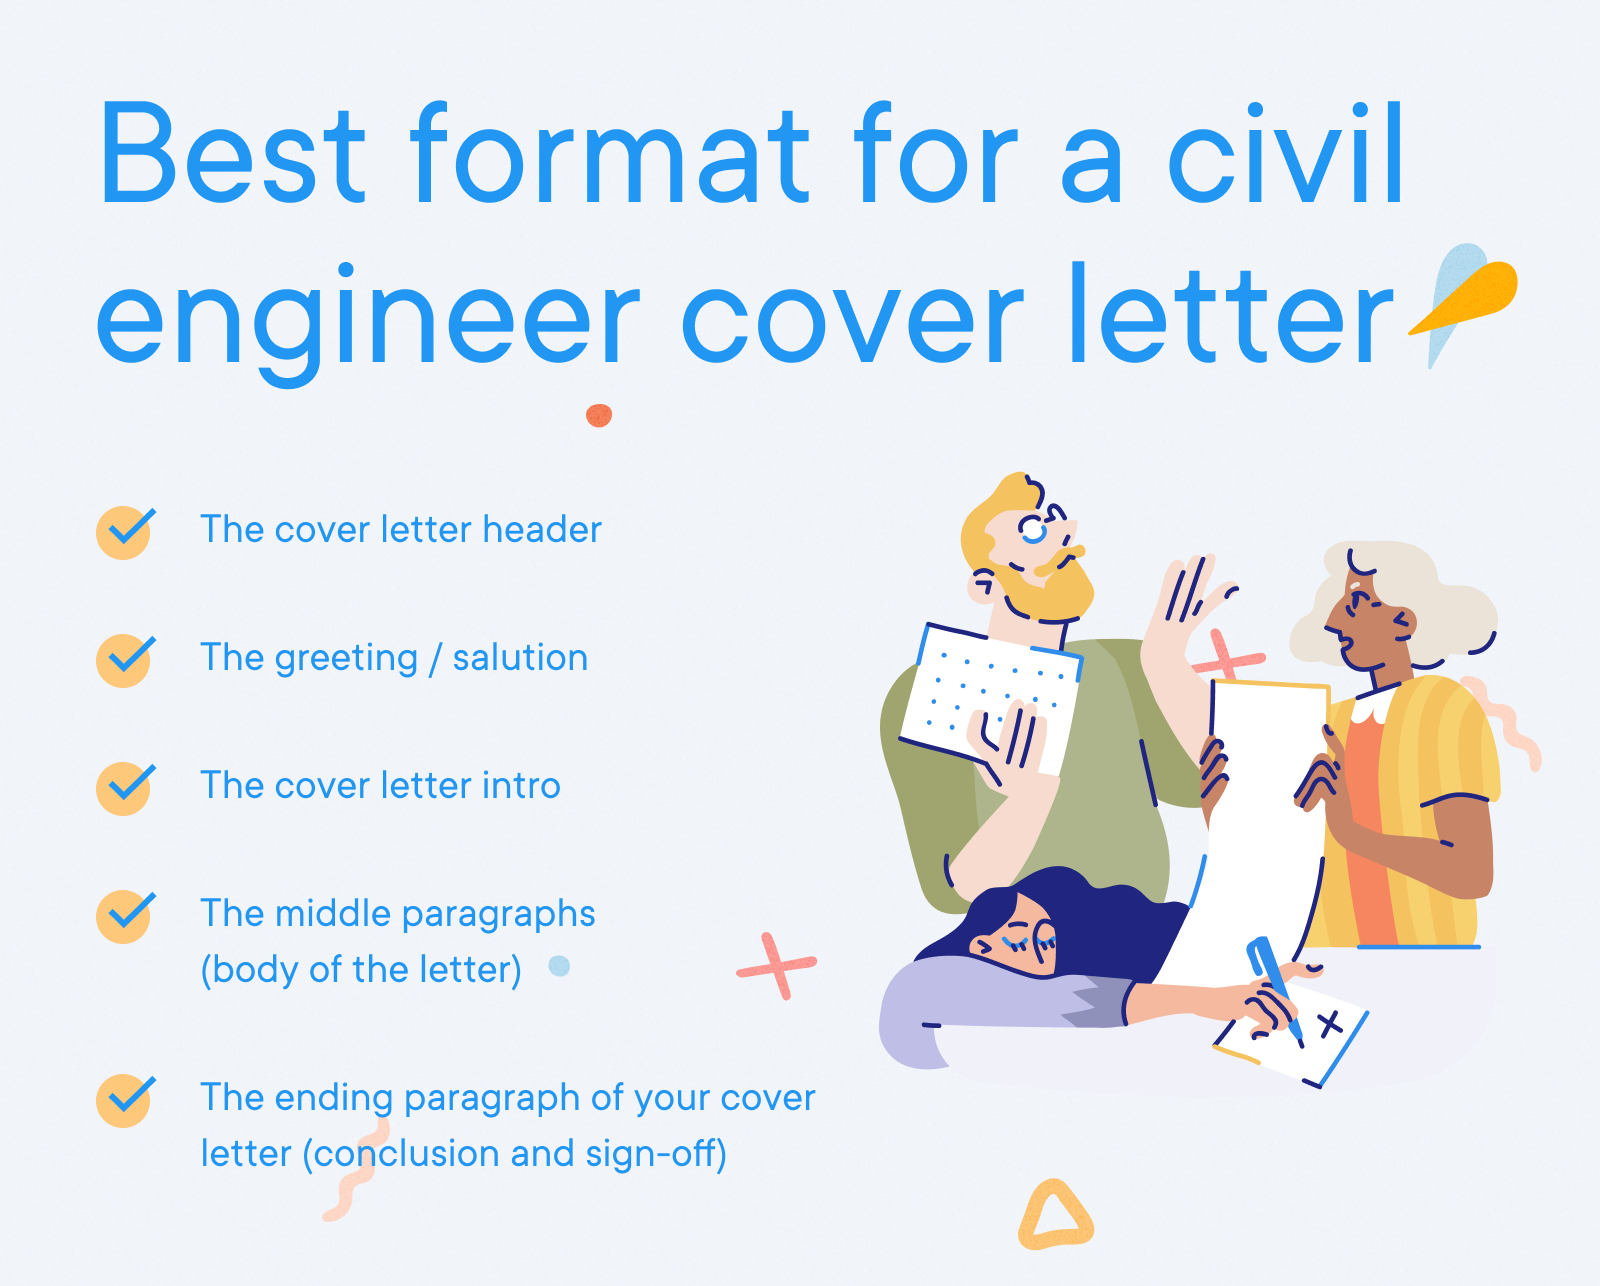 Civil Engineer - Best format for a civil engineer cover letter